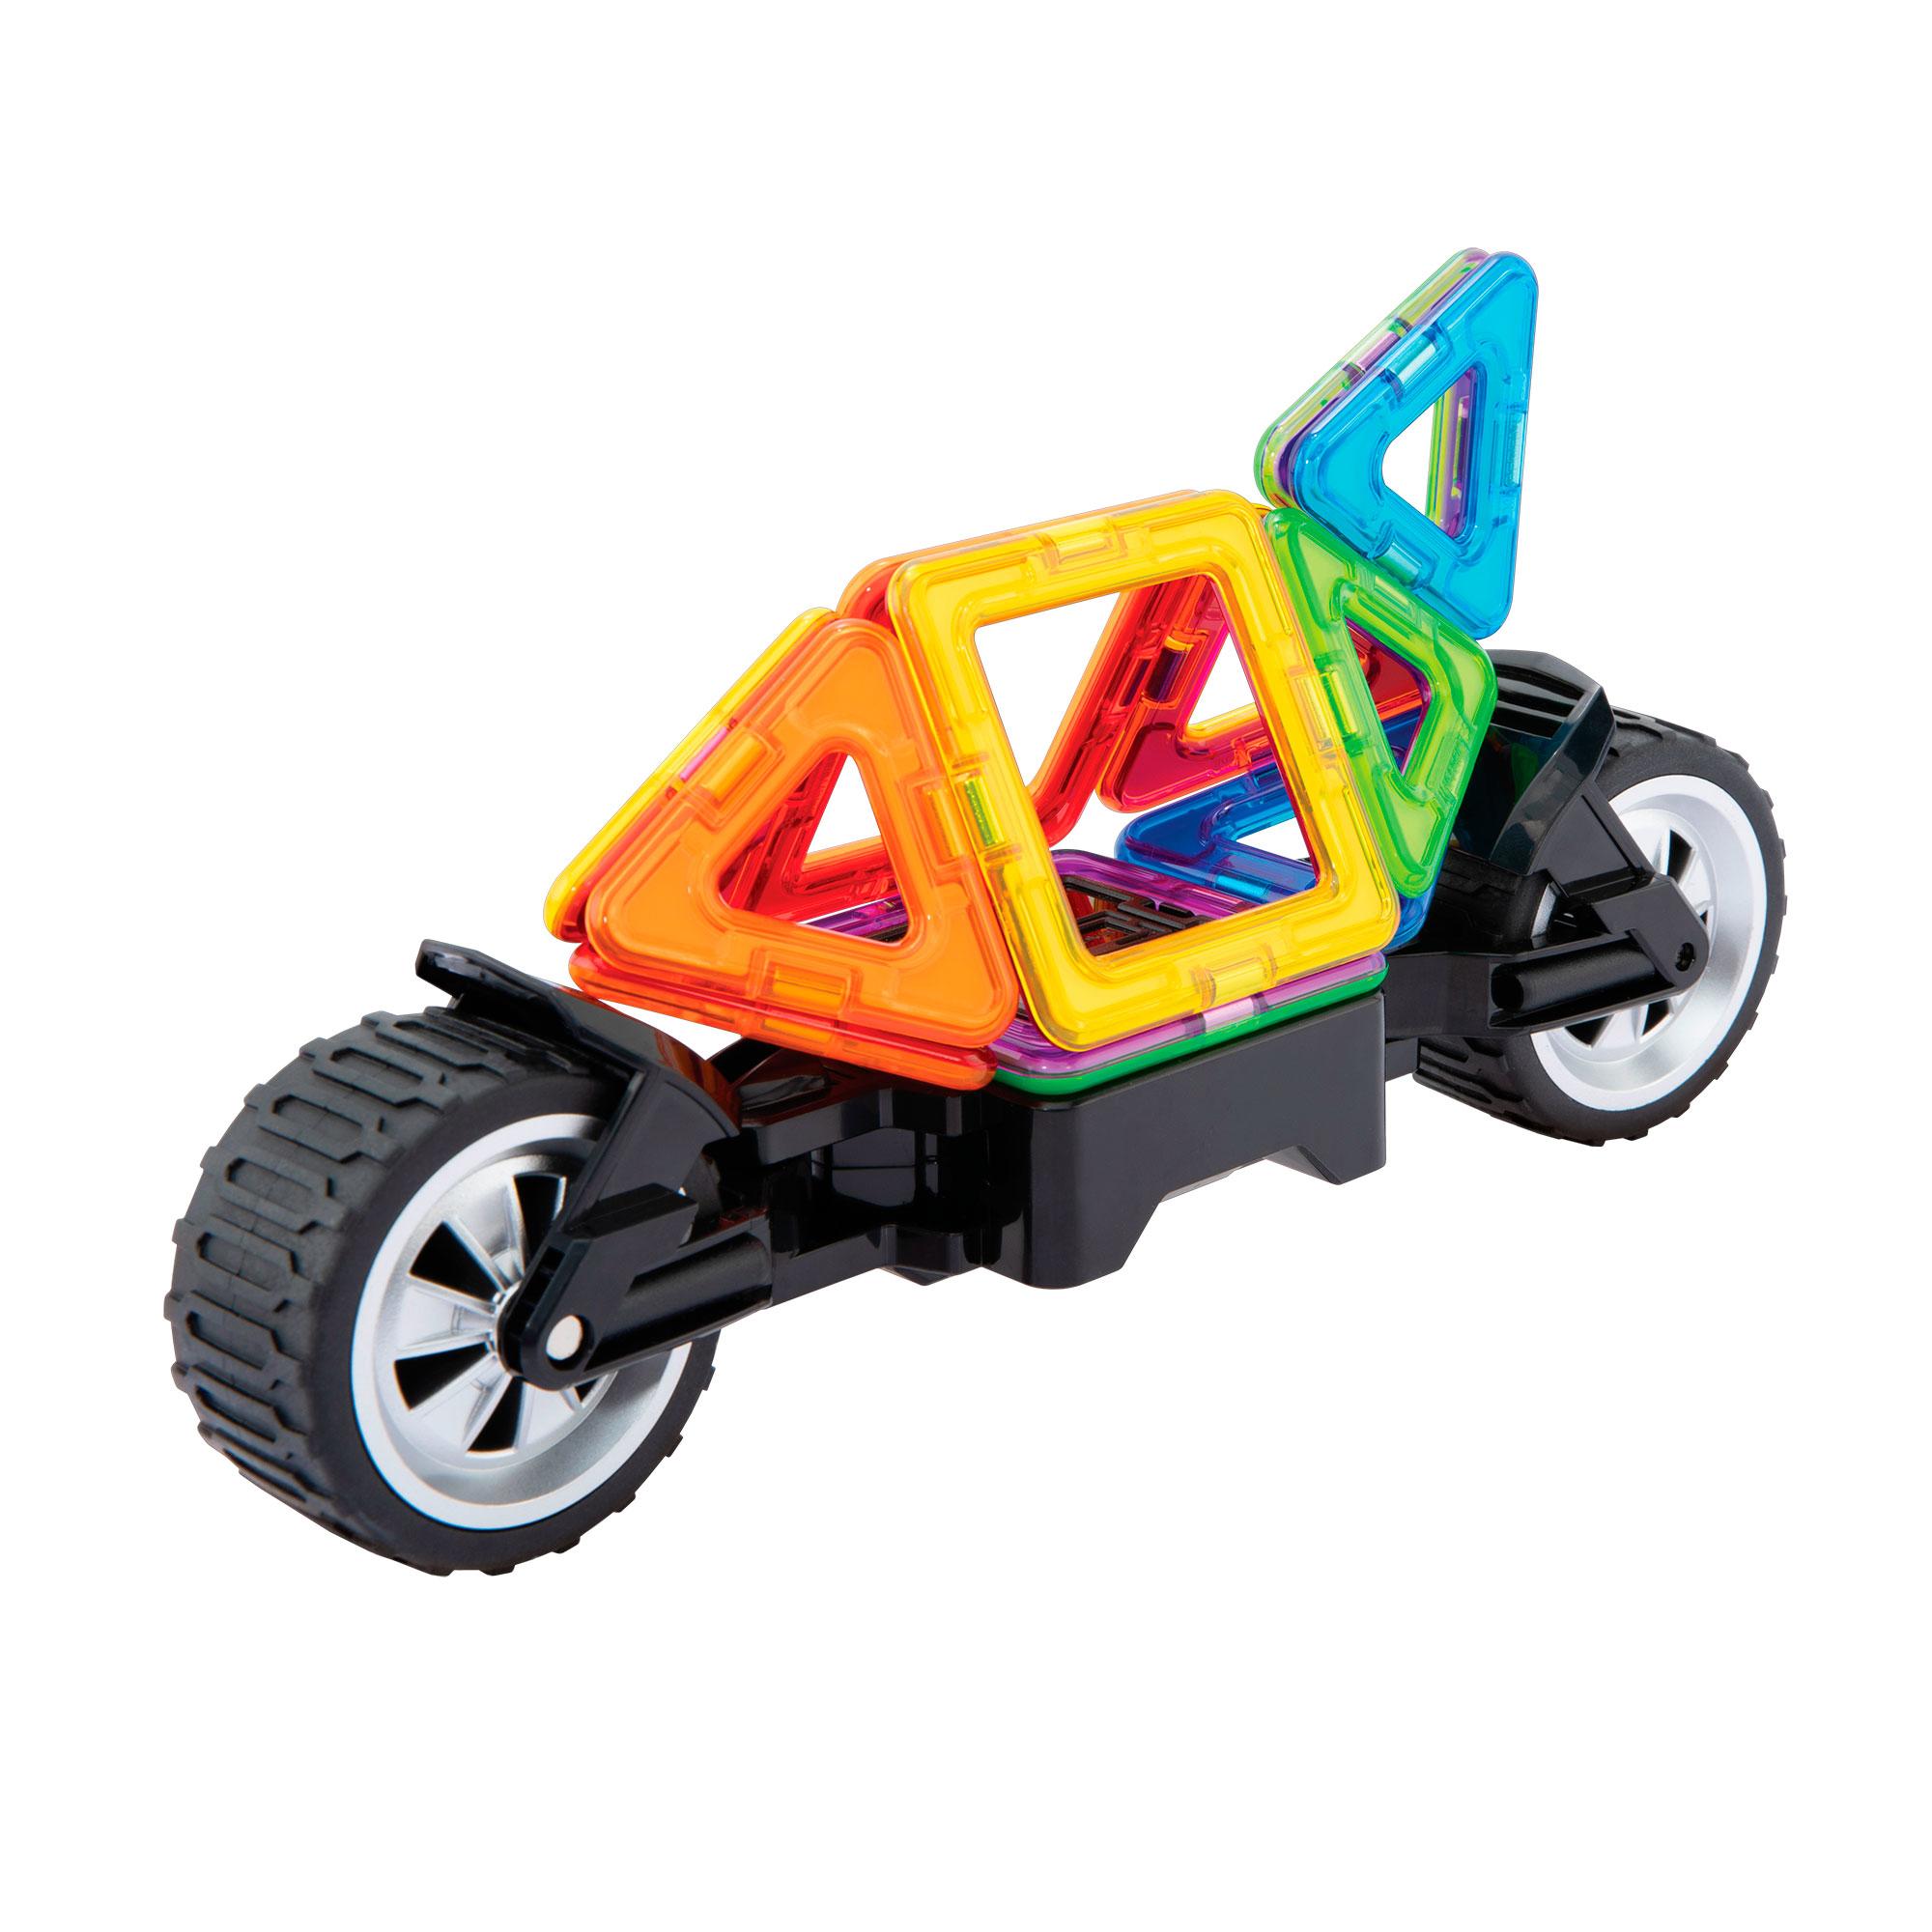 Magformers parts made up into a kart.